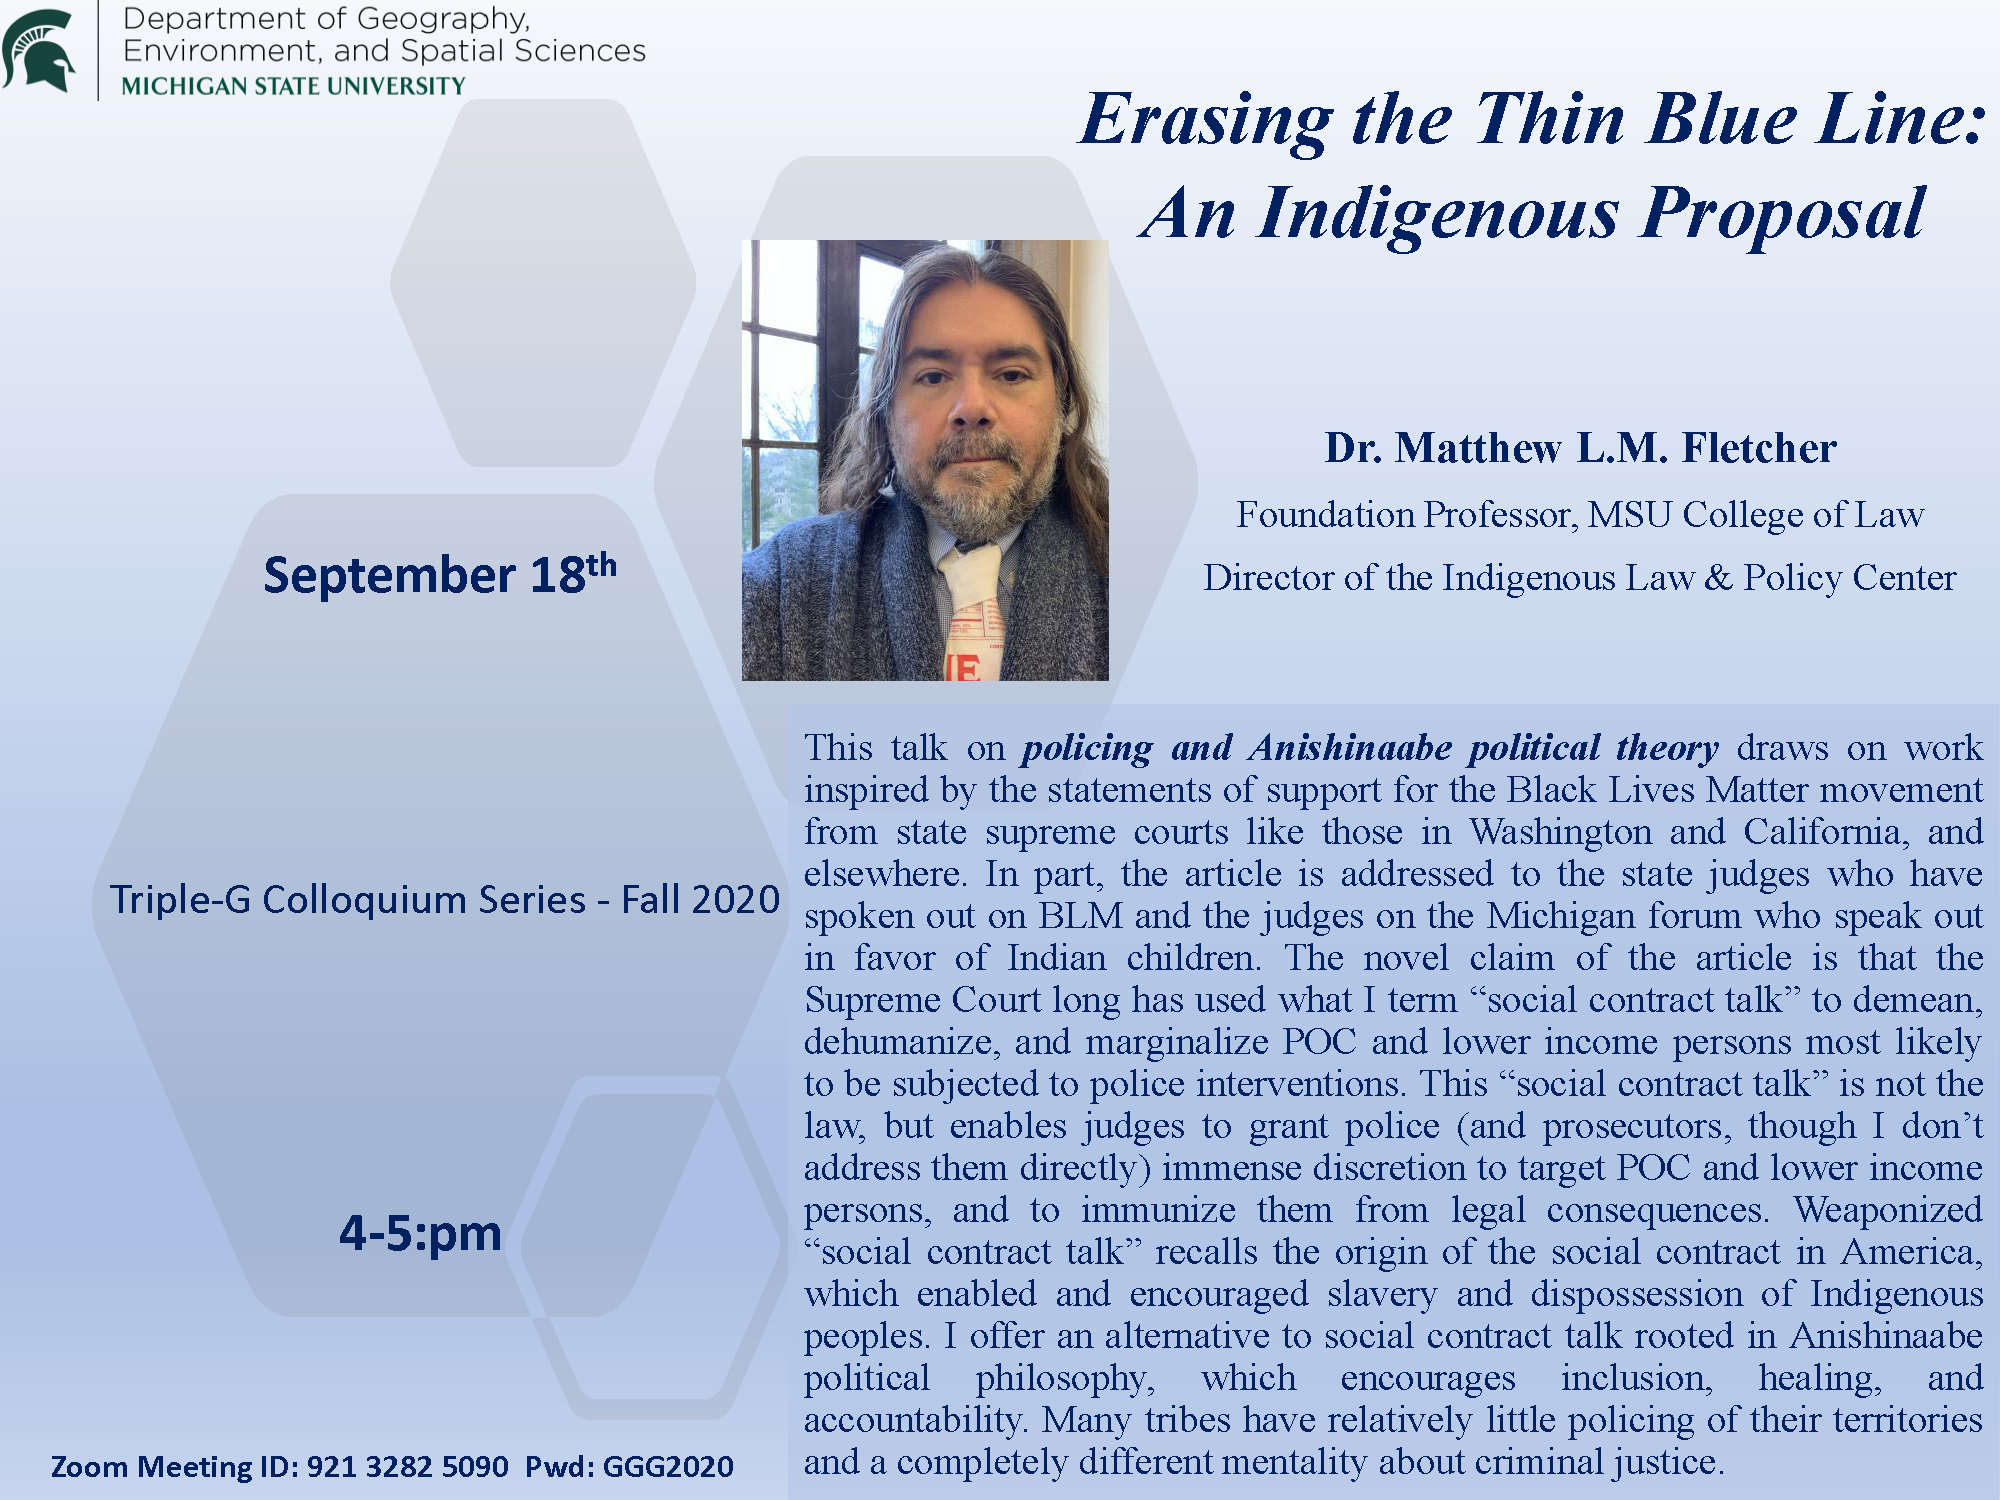 Erasing the Thin Blue Line: An Indigenous Proposal